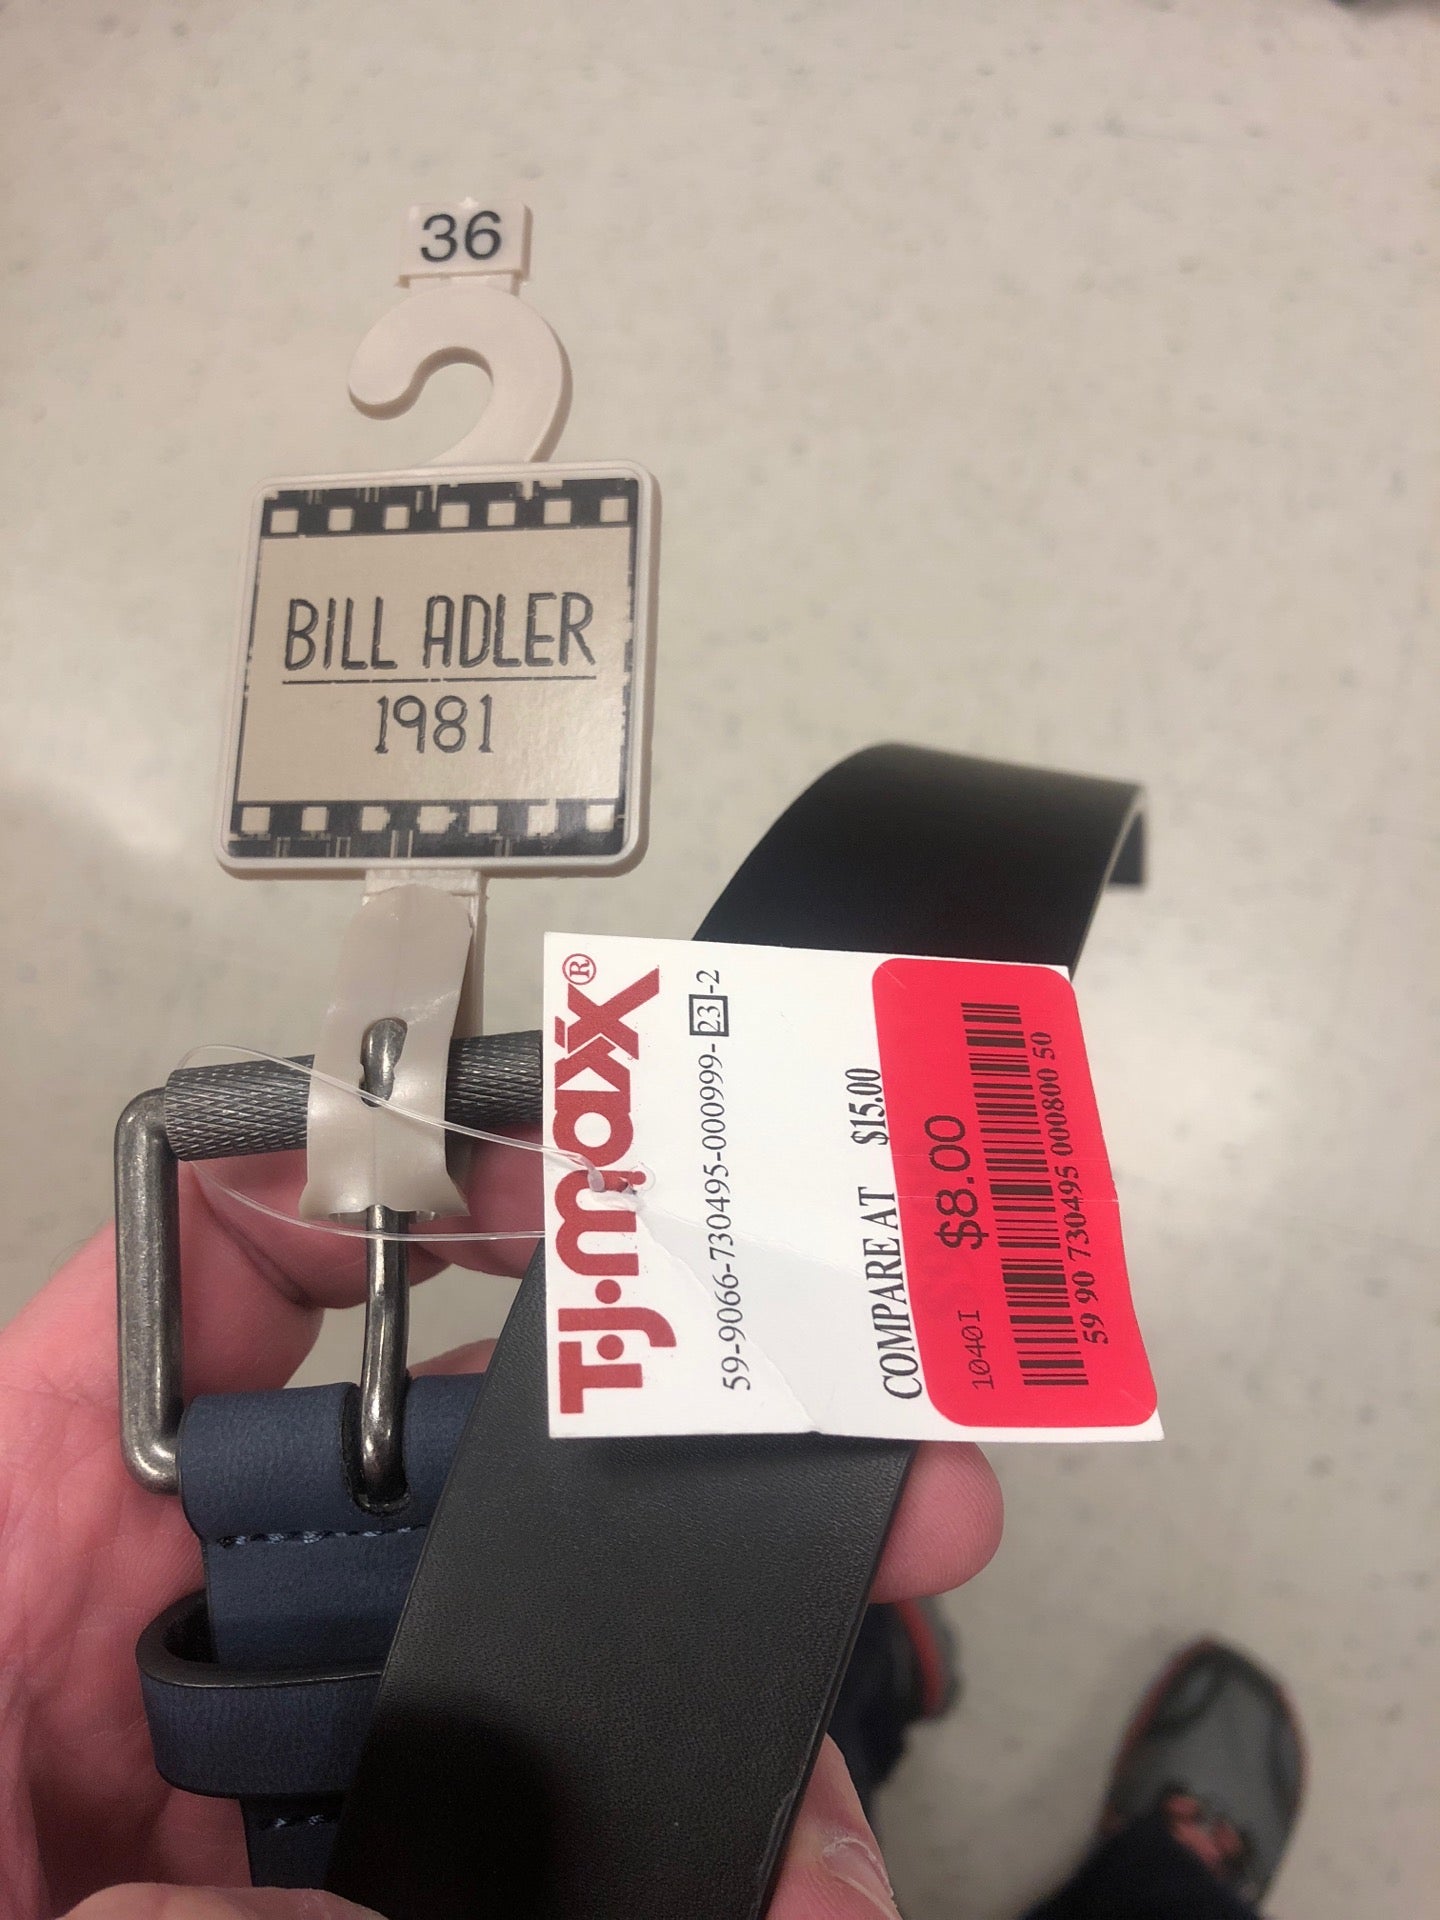 T.J.Maxx locations in Los Angeles - See hours, directions, tips